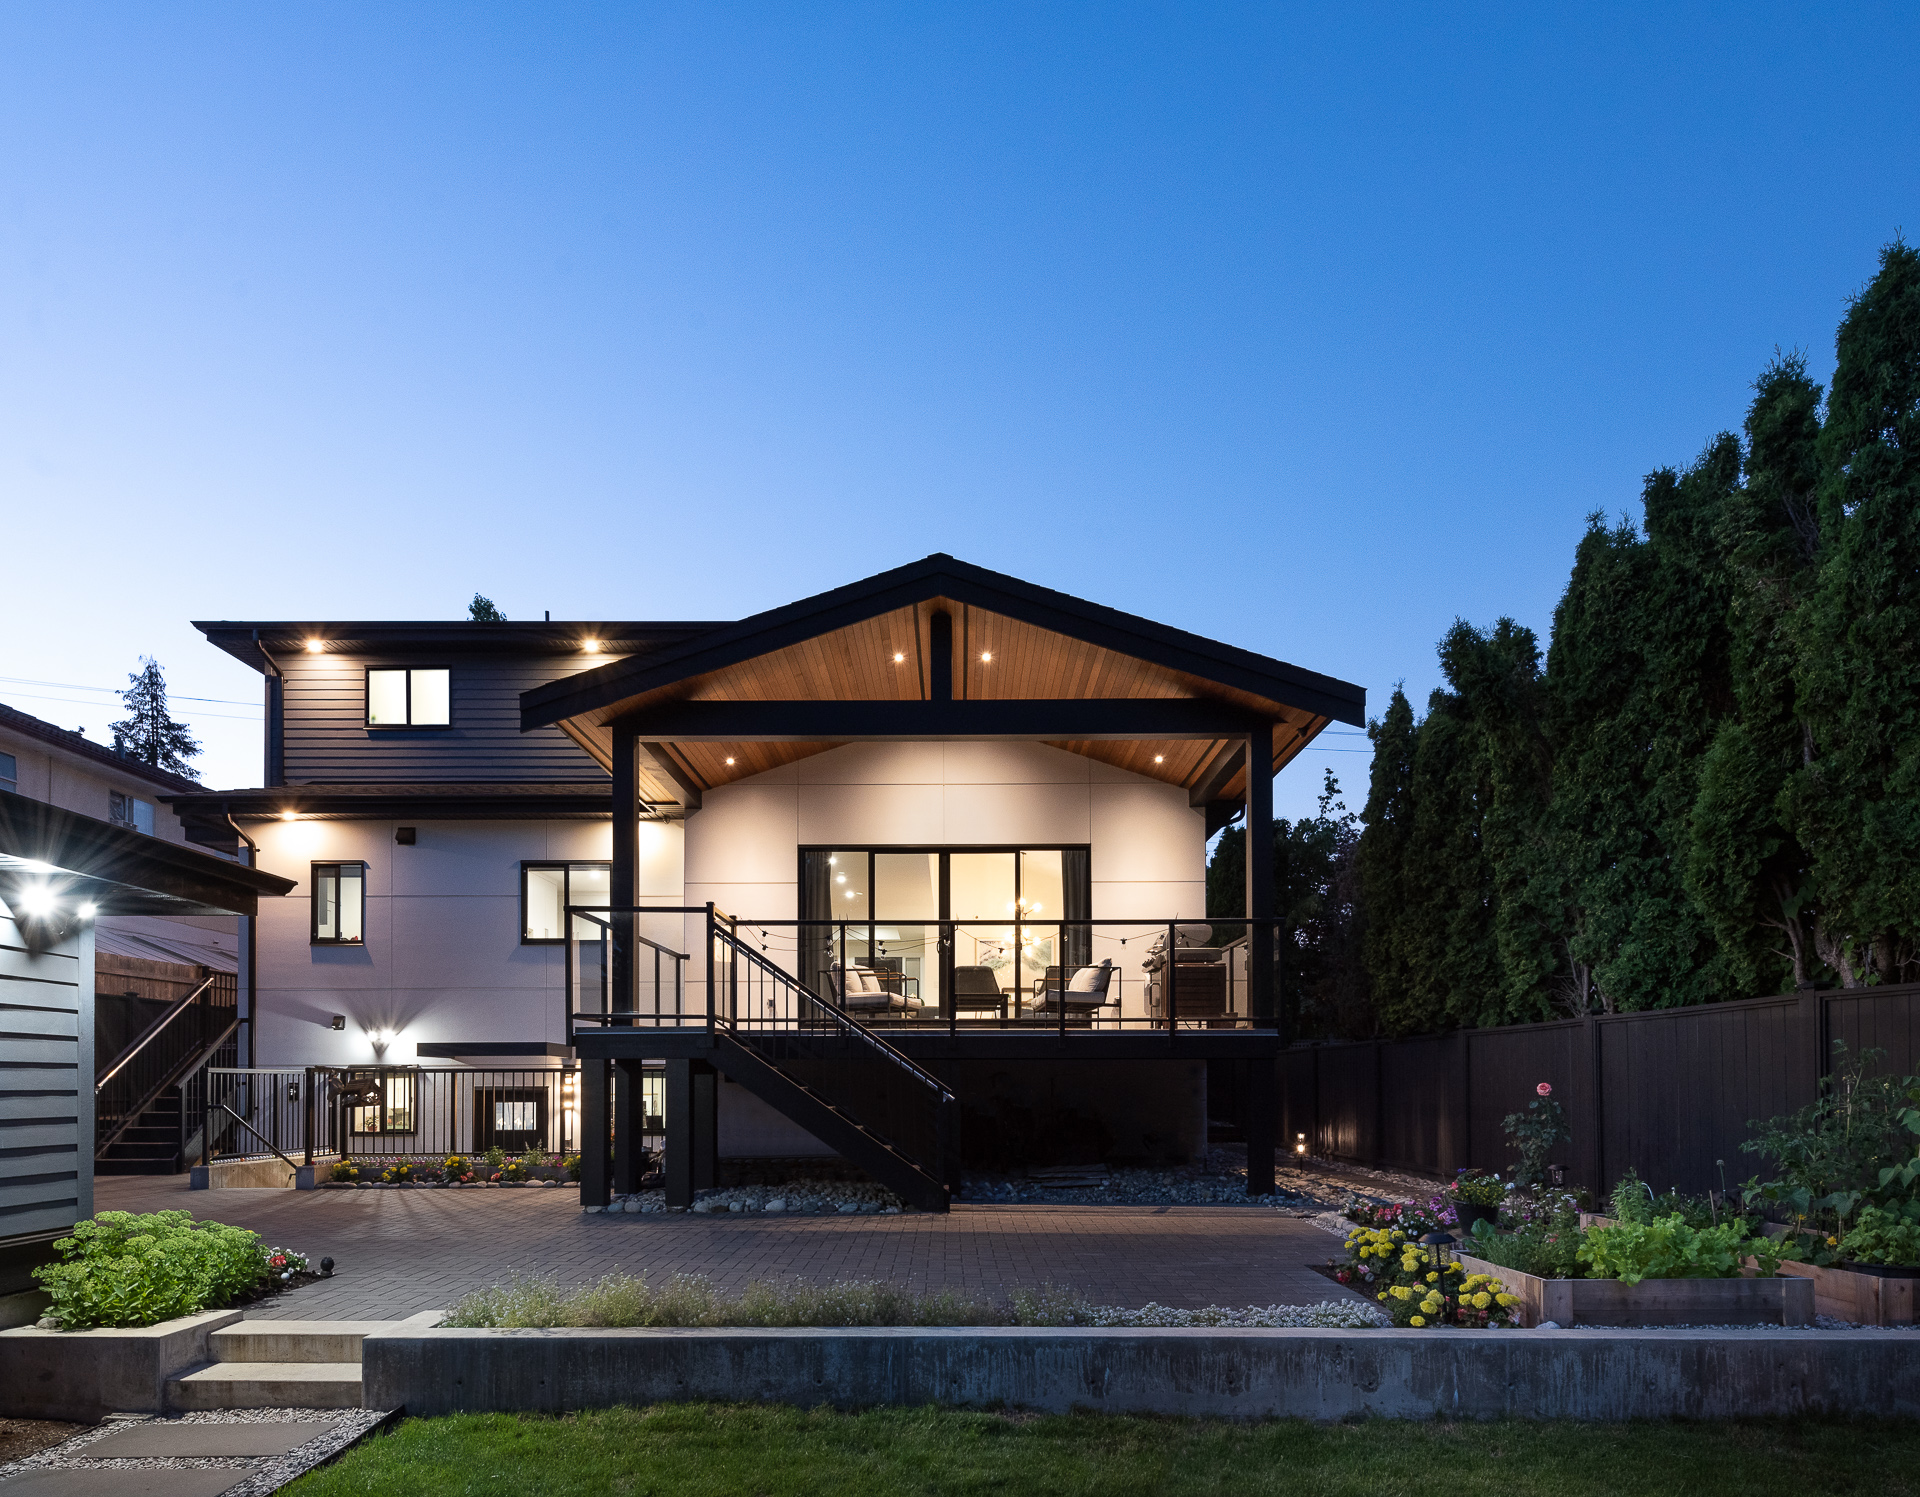 6110 Curtis St Burnaby 360hometours 06s